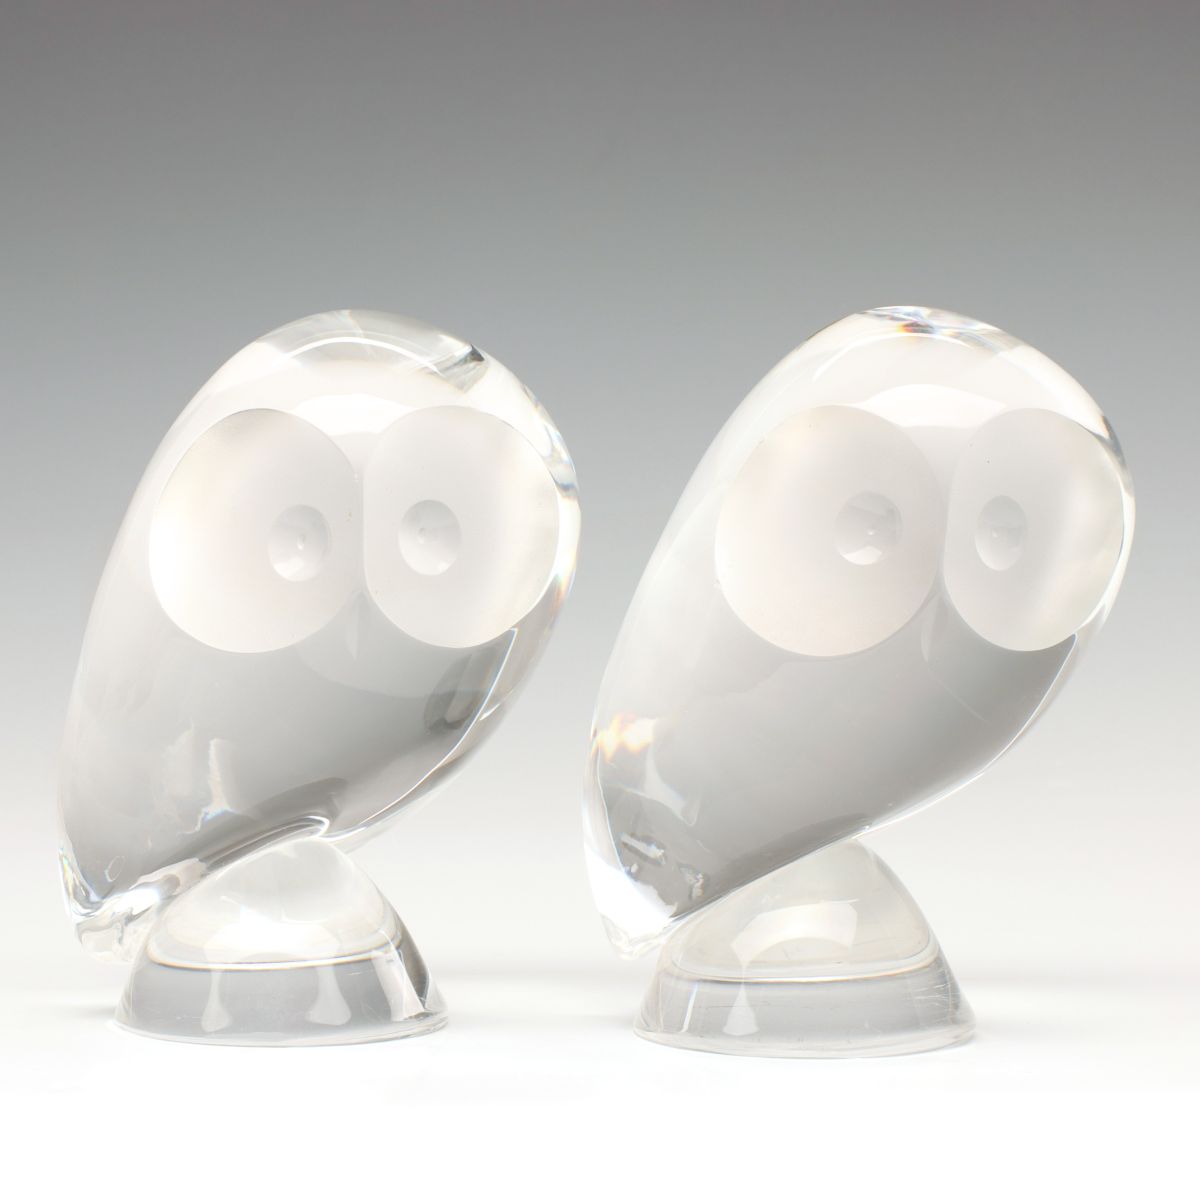 TWO CRYSTAL ART GLASS OWL FIGURES SIGNED STEUBEN